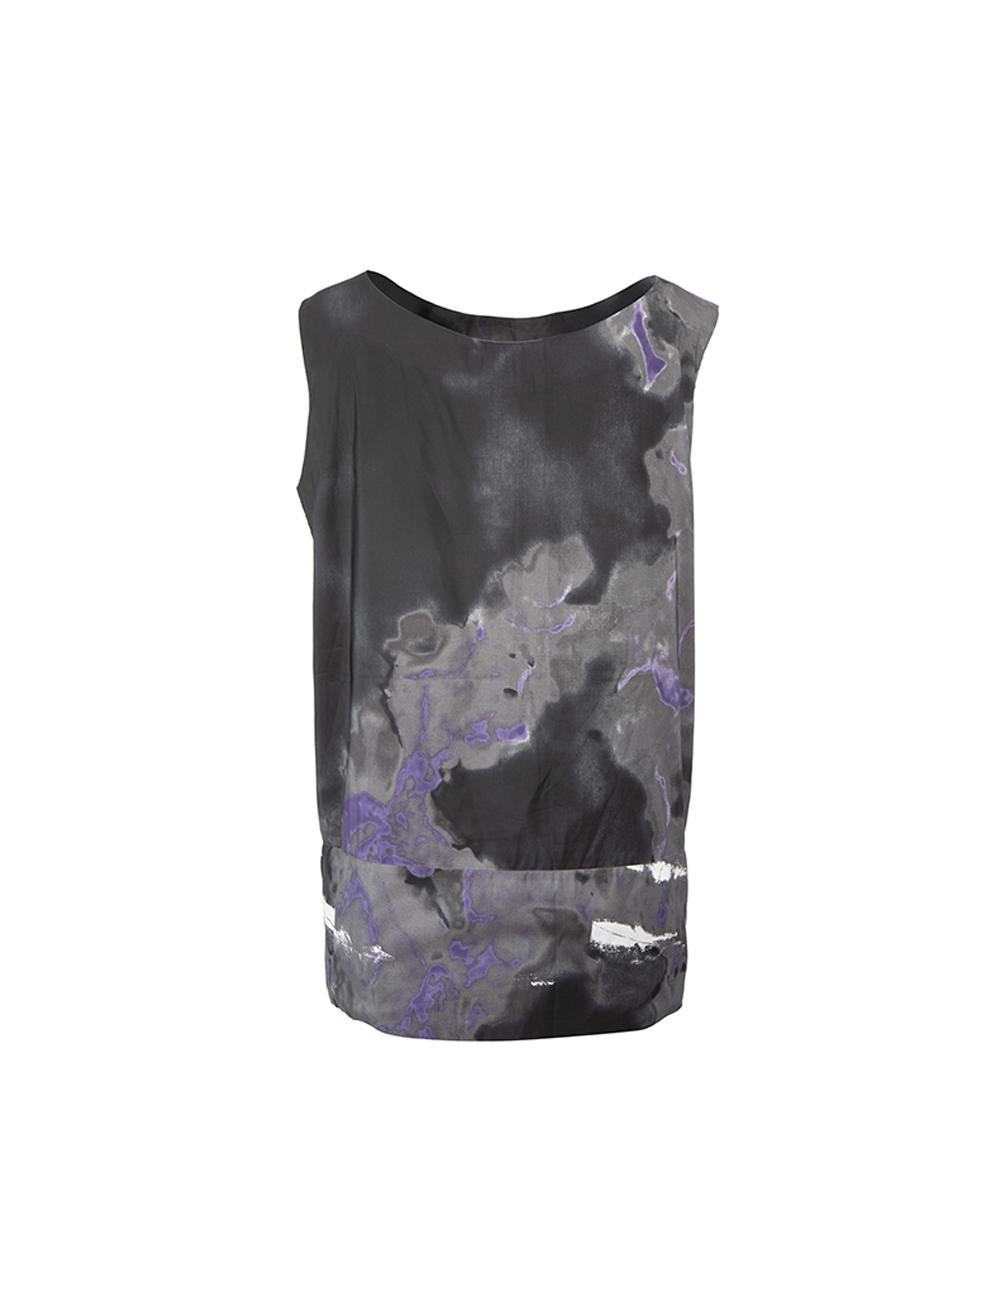 Tie-Dyed Print Sleeveless Top Size S In Good Condition For Sale In London, GB